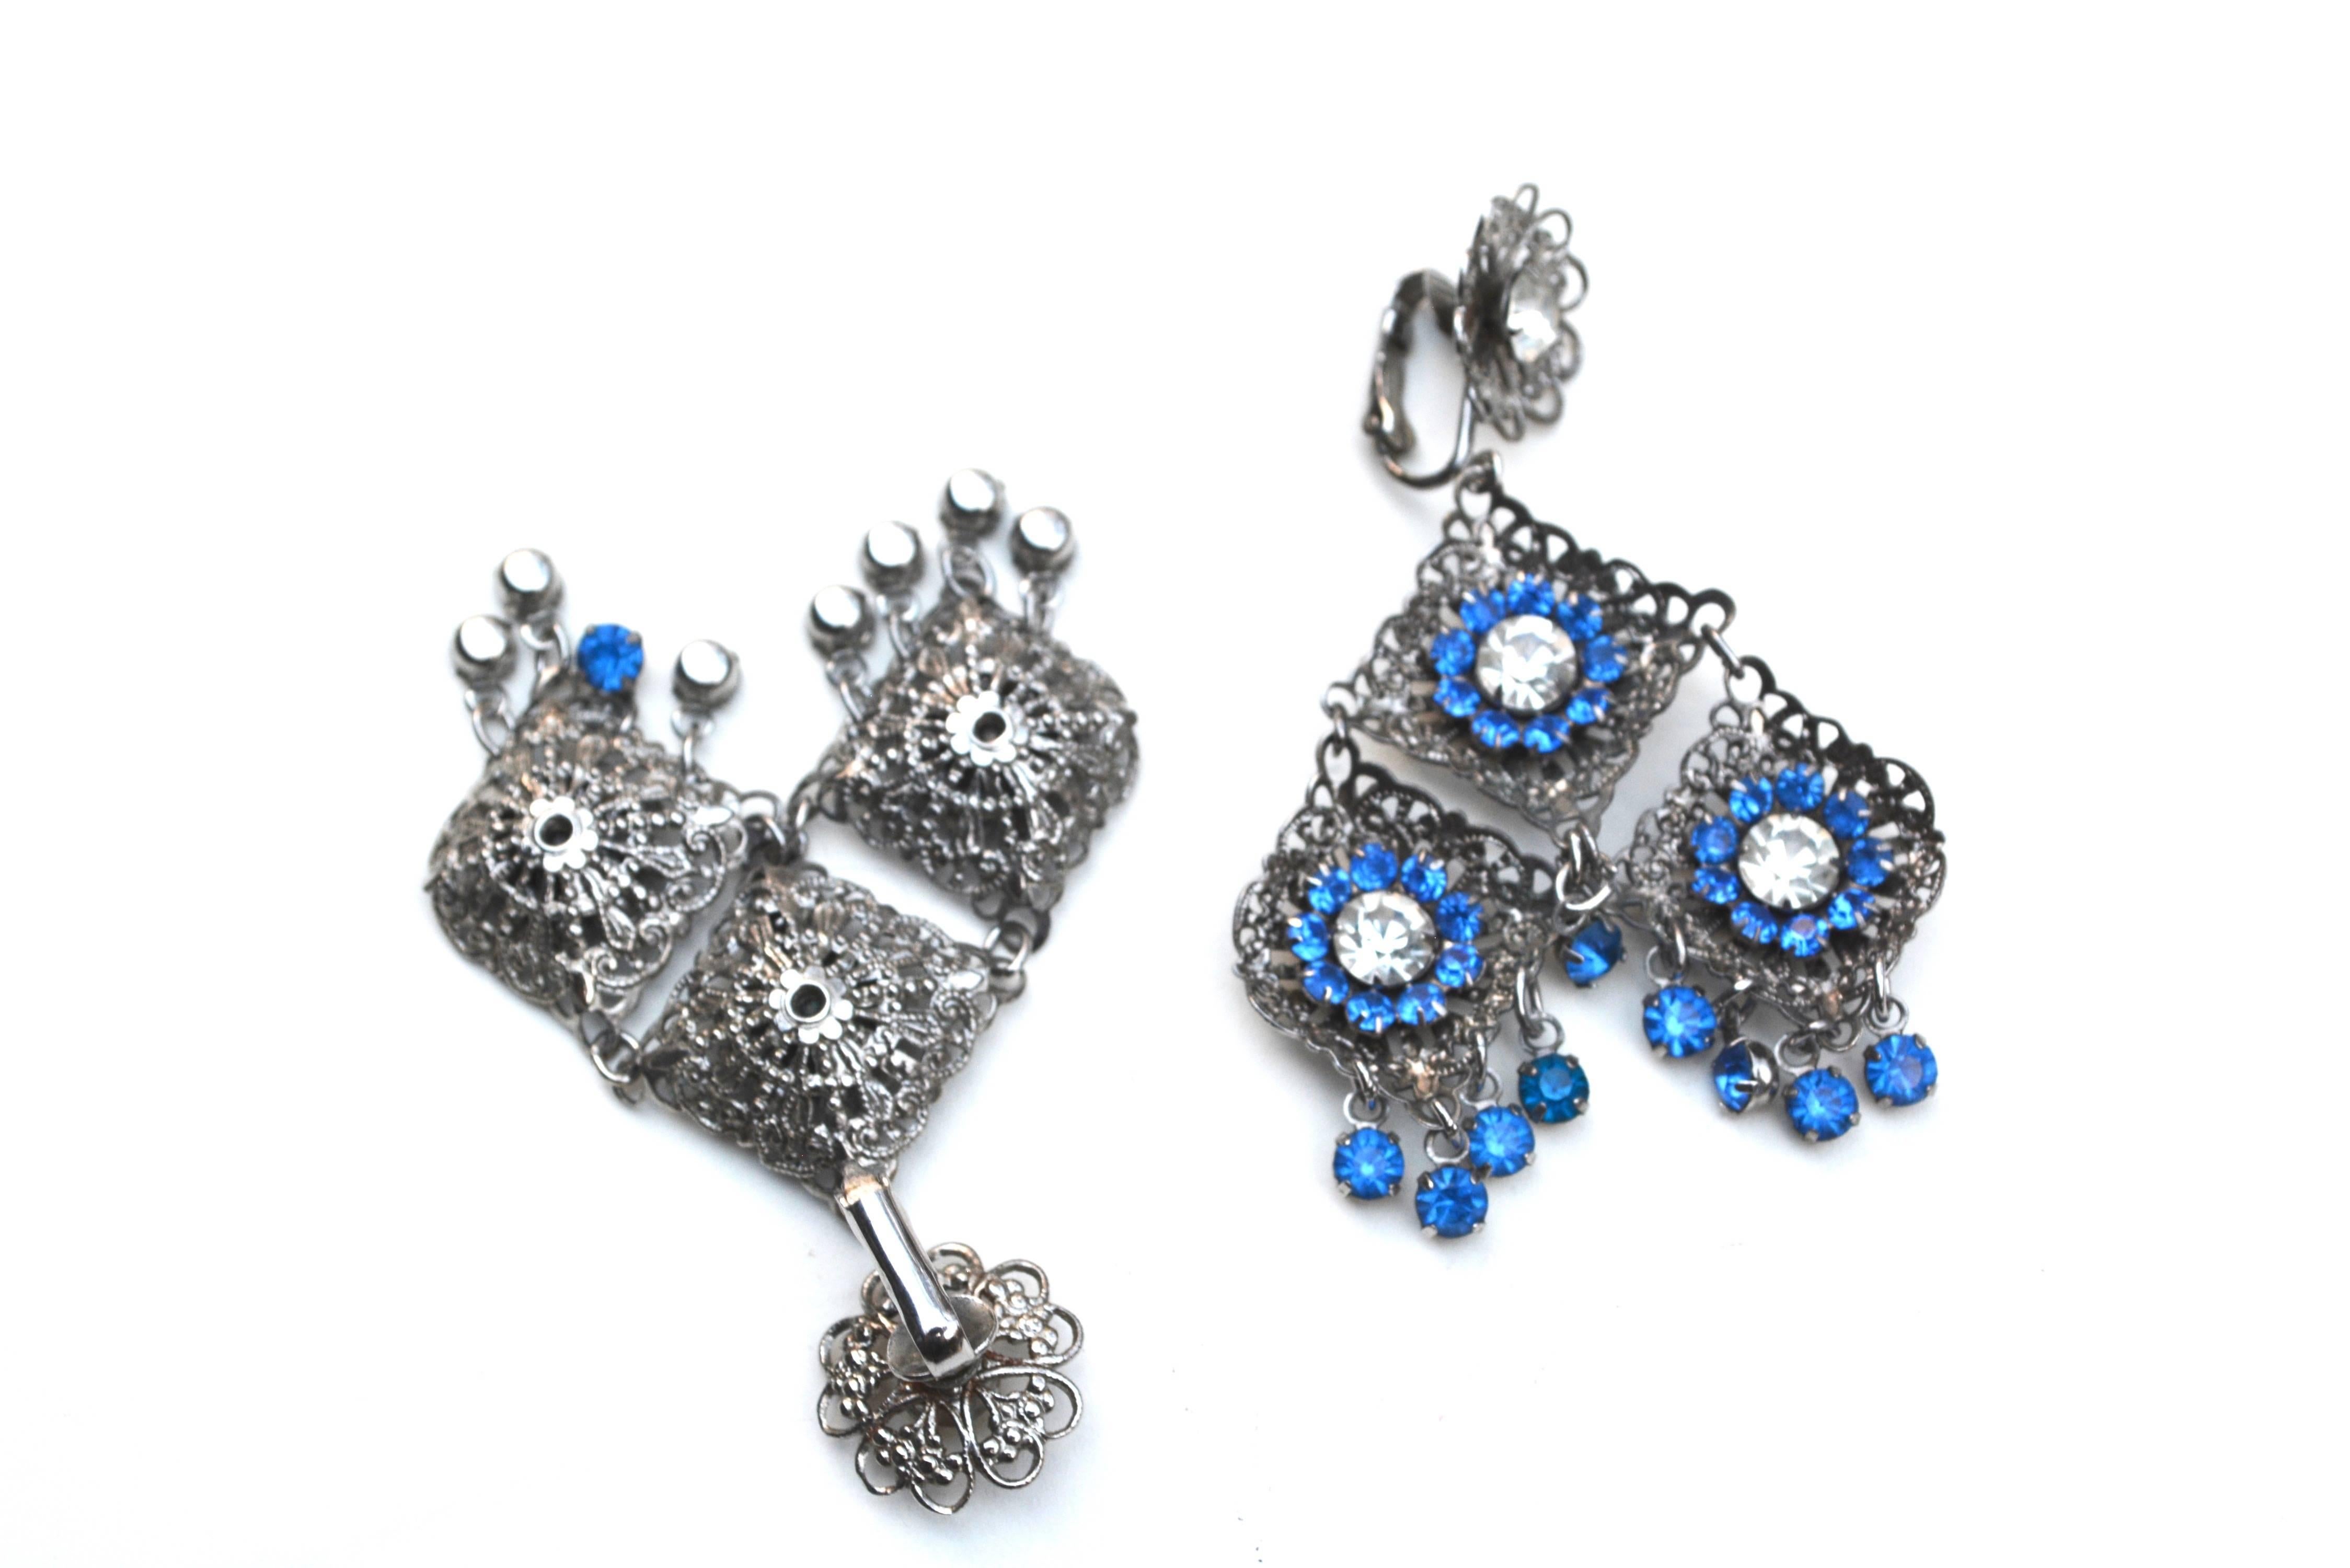 Vintage unsigned silver metal and blue rhinestone earrings, circa 1960s. Great movement and scale.  About 2.75" long x 2" wide. 